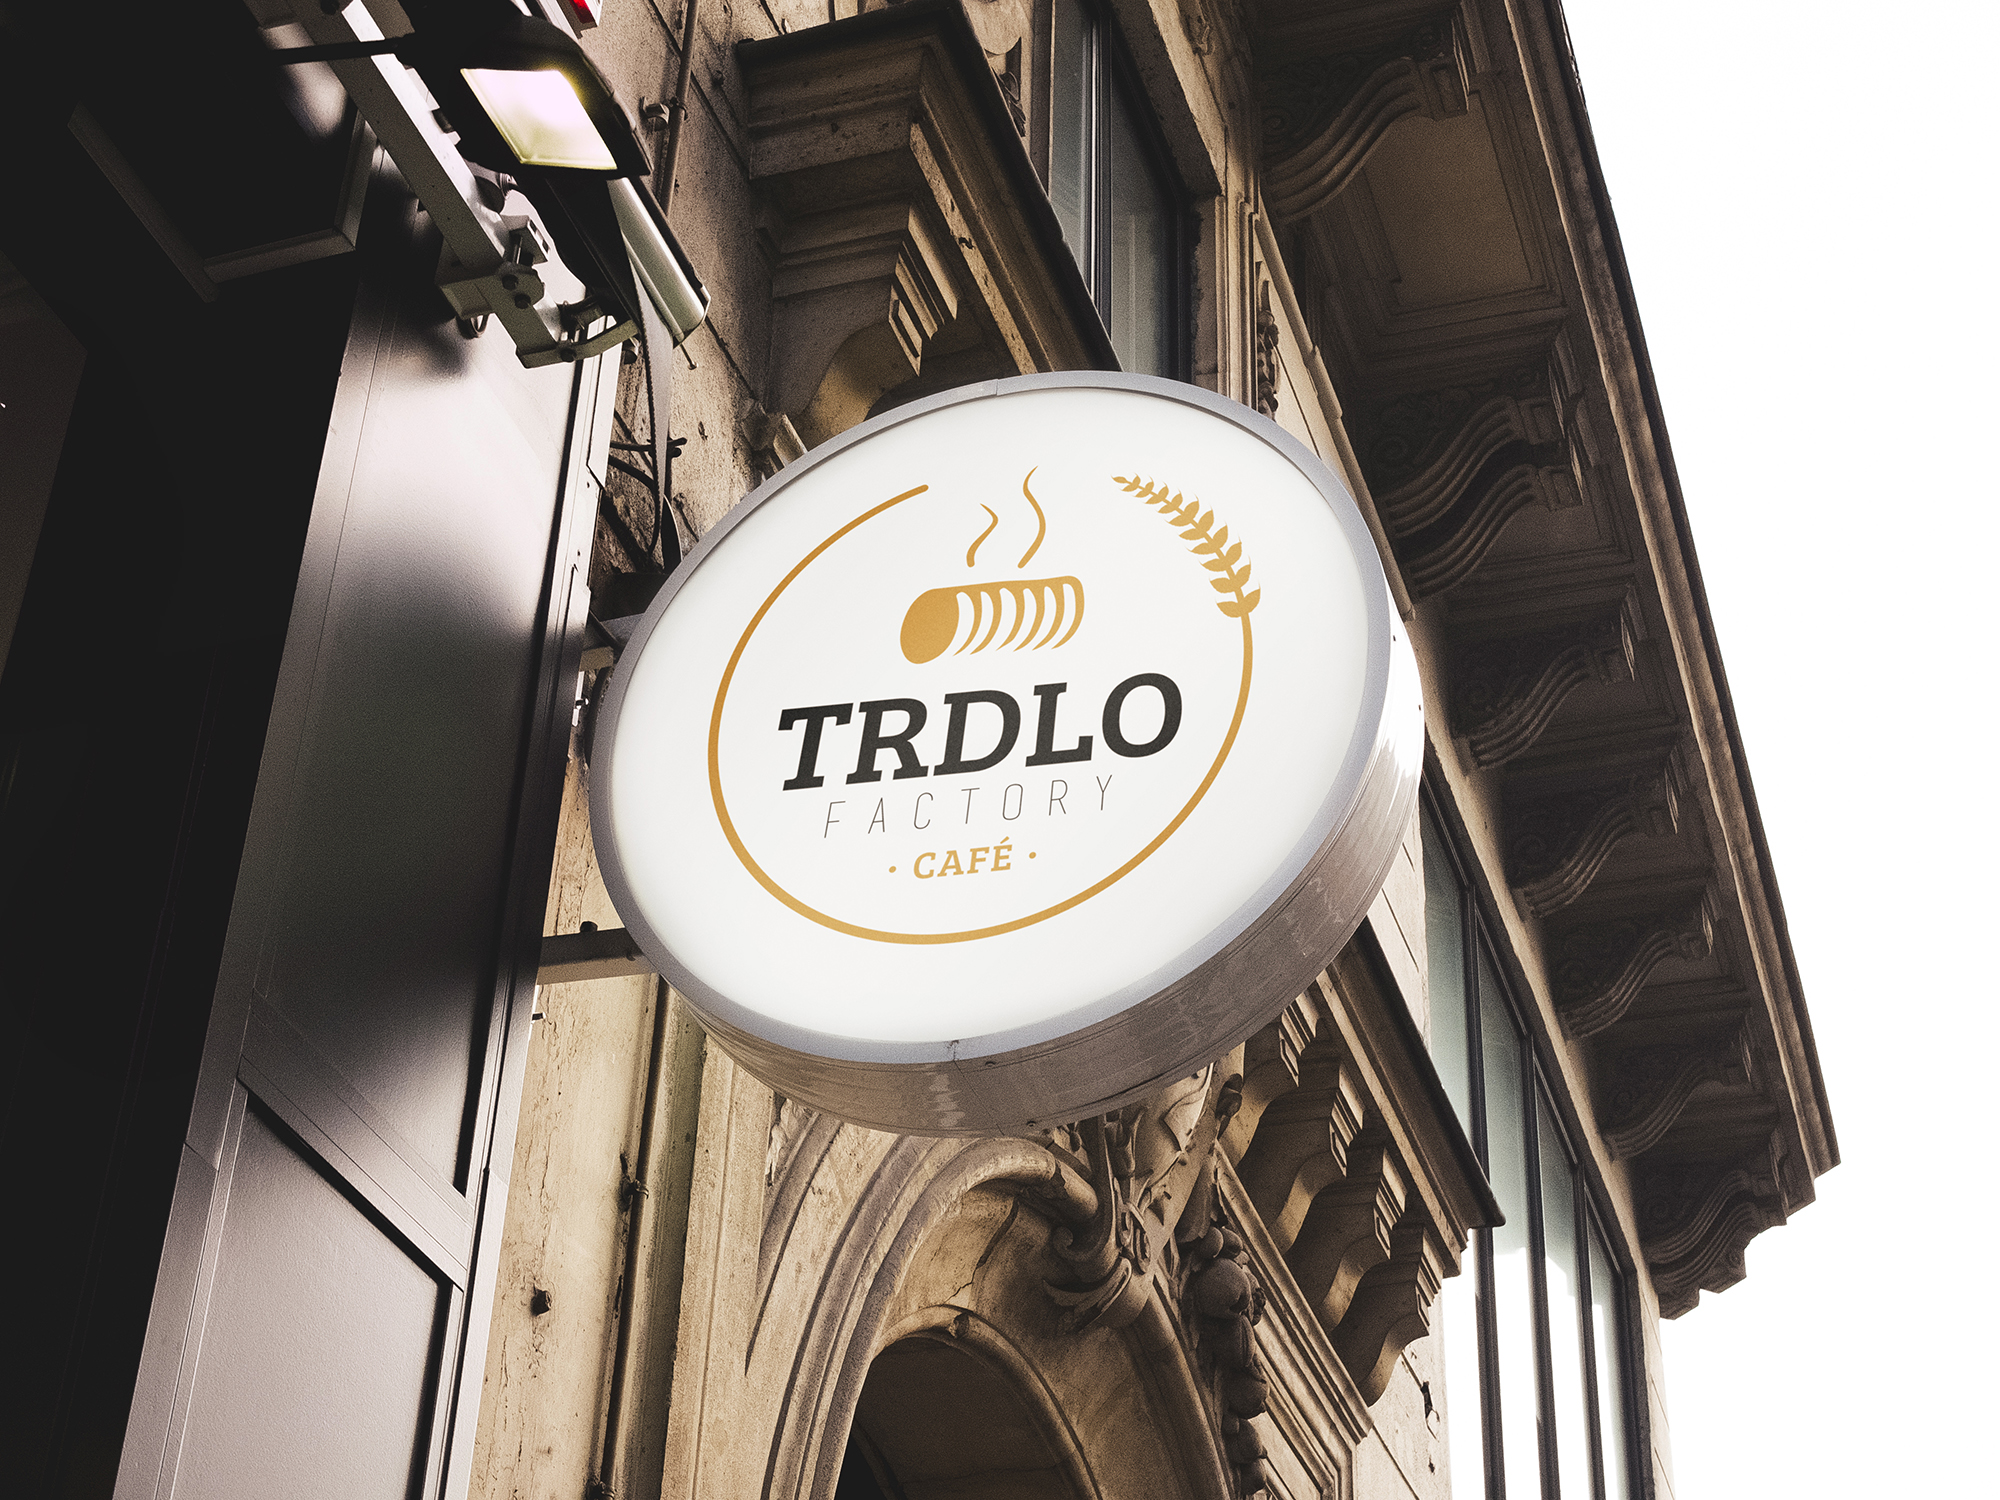 the Trdlo Factory sign